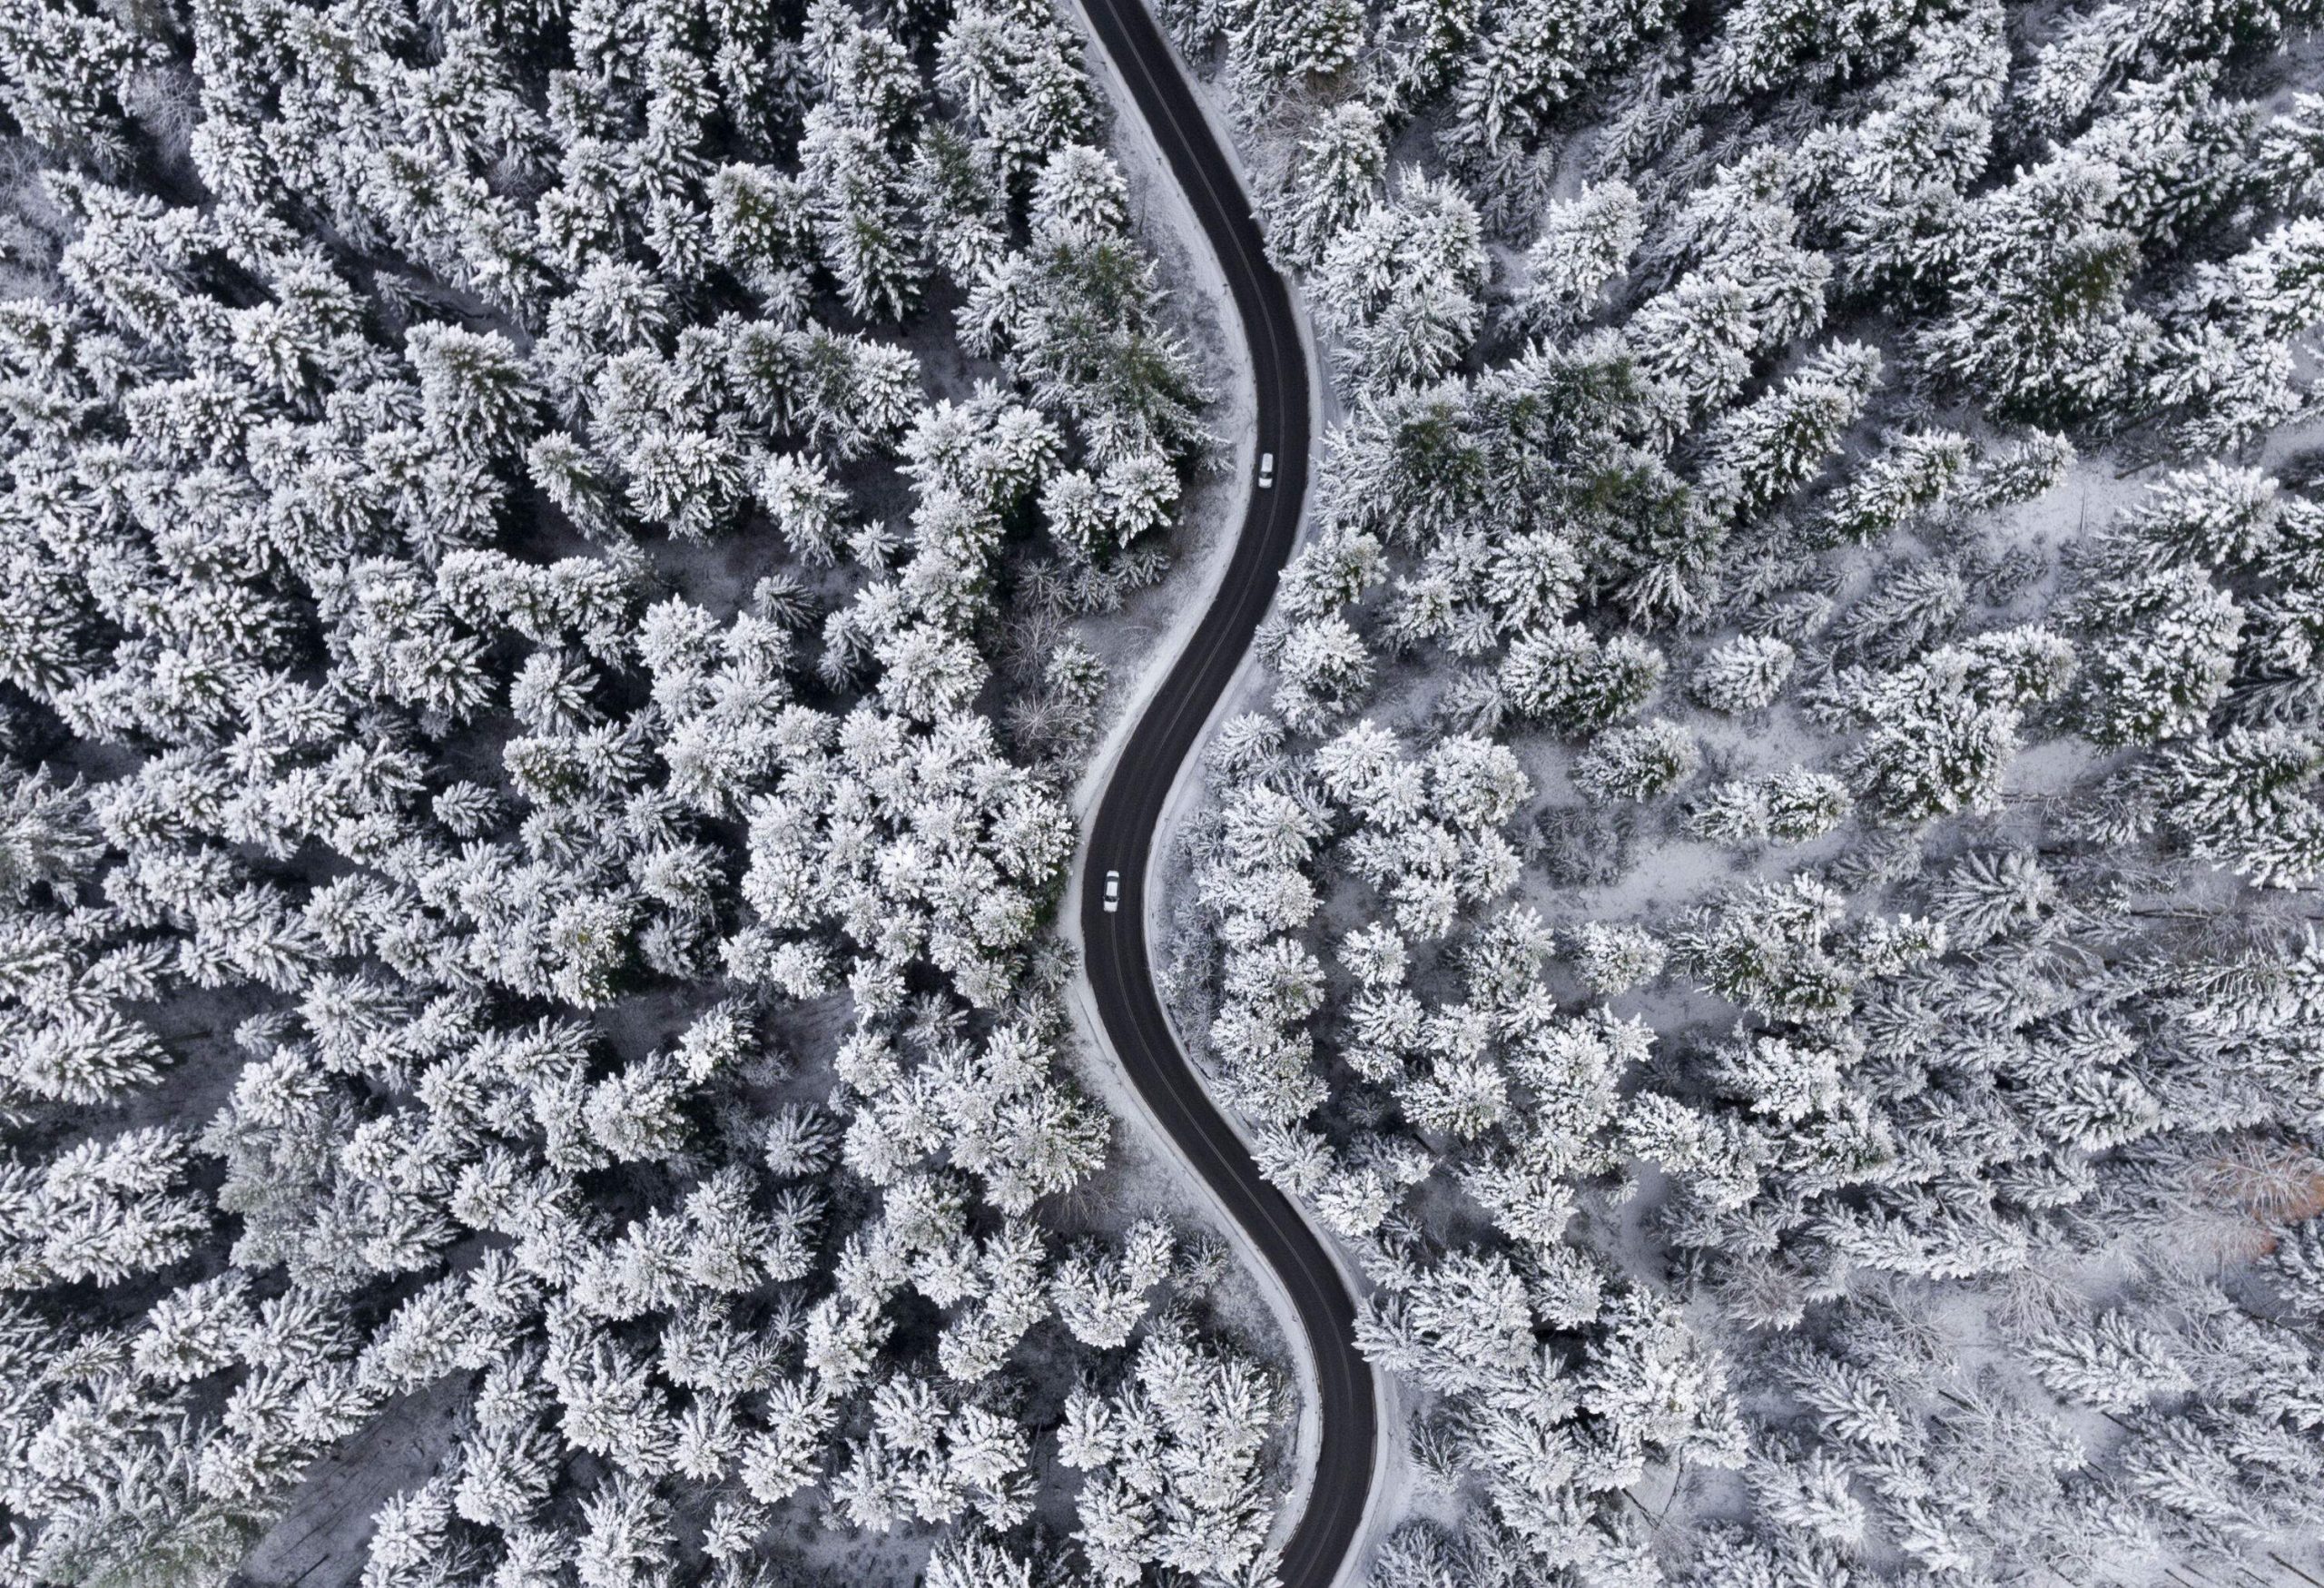 A winding road leads through a picturesque forest, blanketed in a fresh layer of snow.